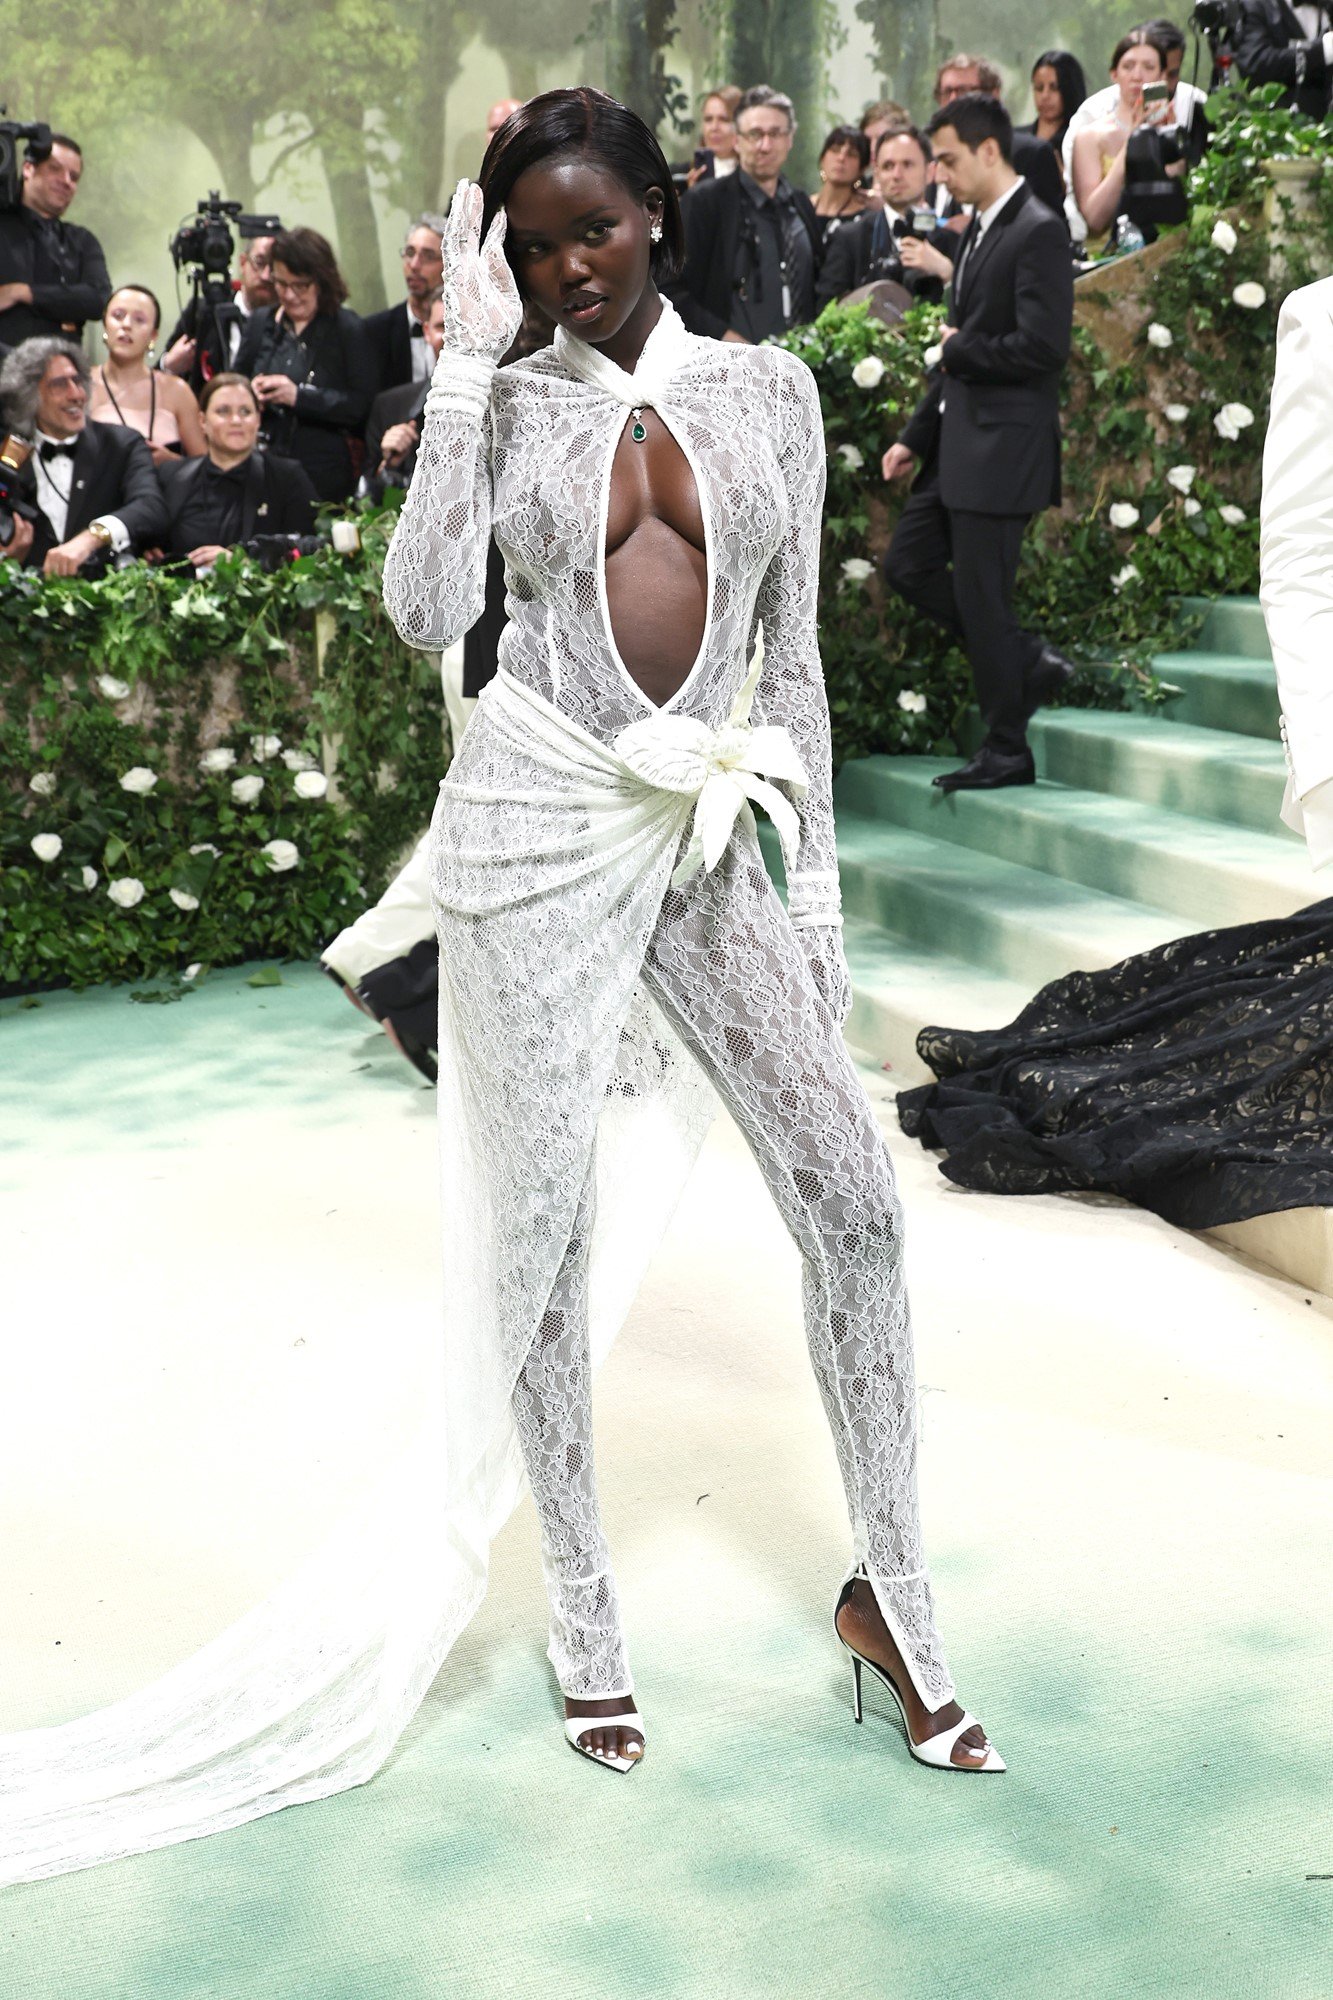 Adut wears a lacey white body suit with a slid down the chest.